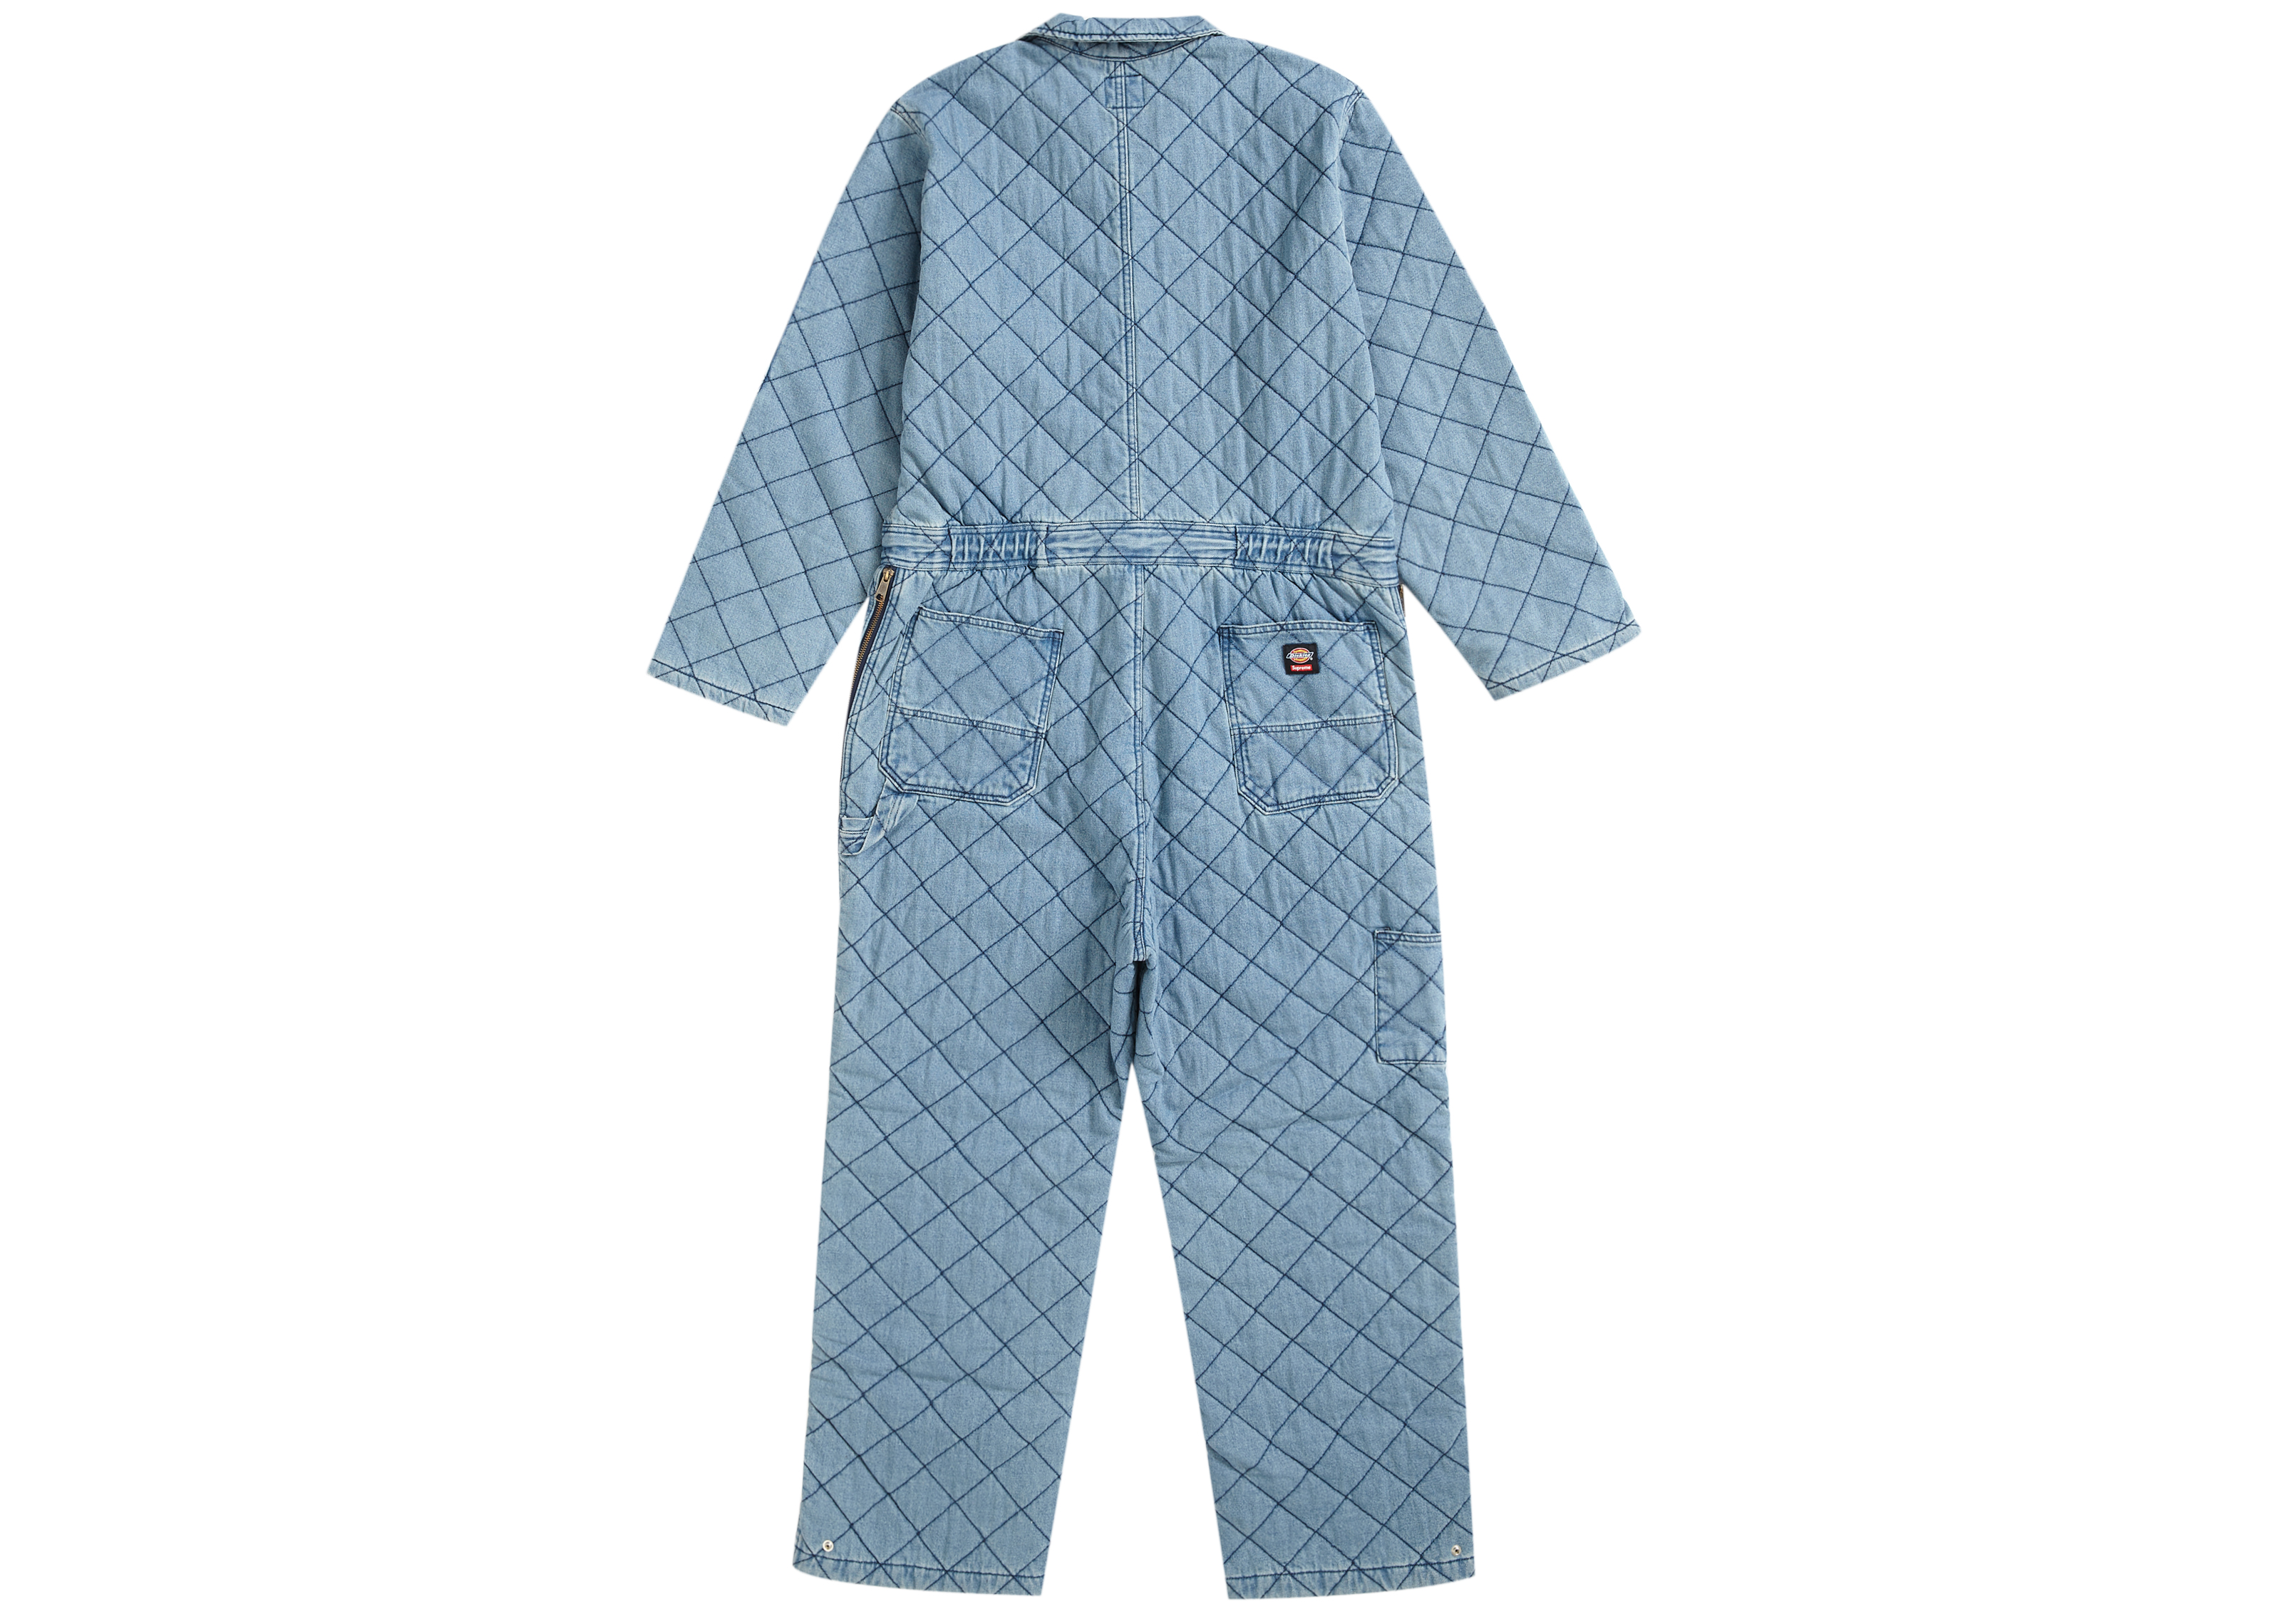 Supreme x Dickies Quilted Denim Coverall Denim